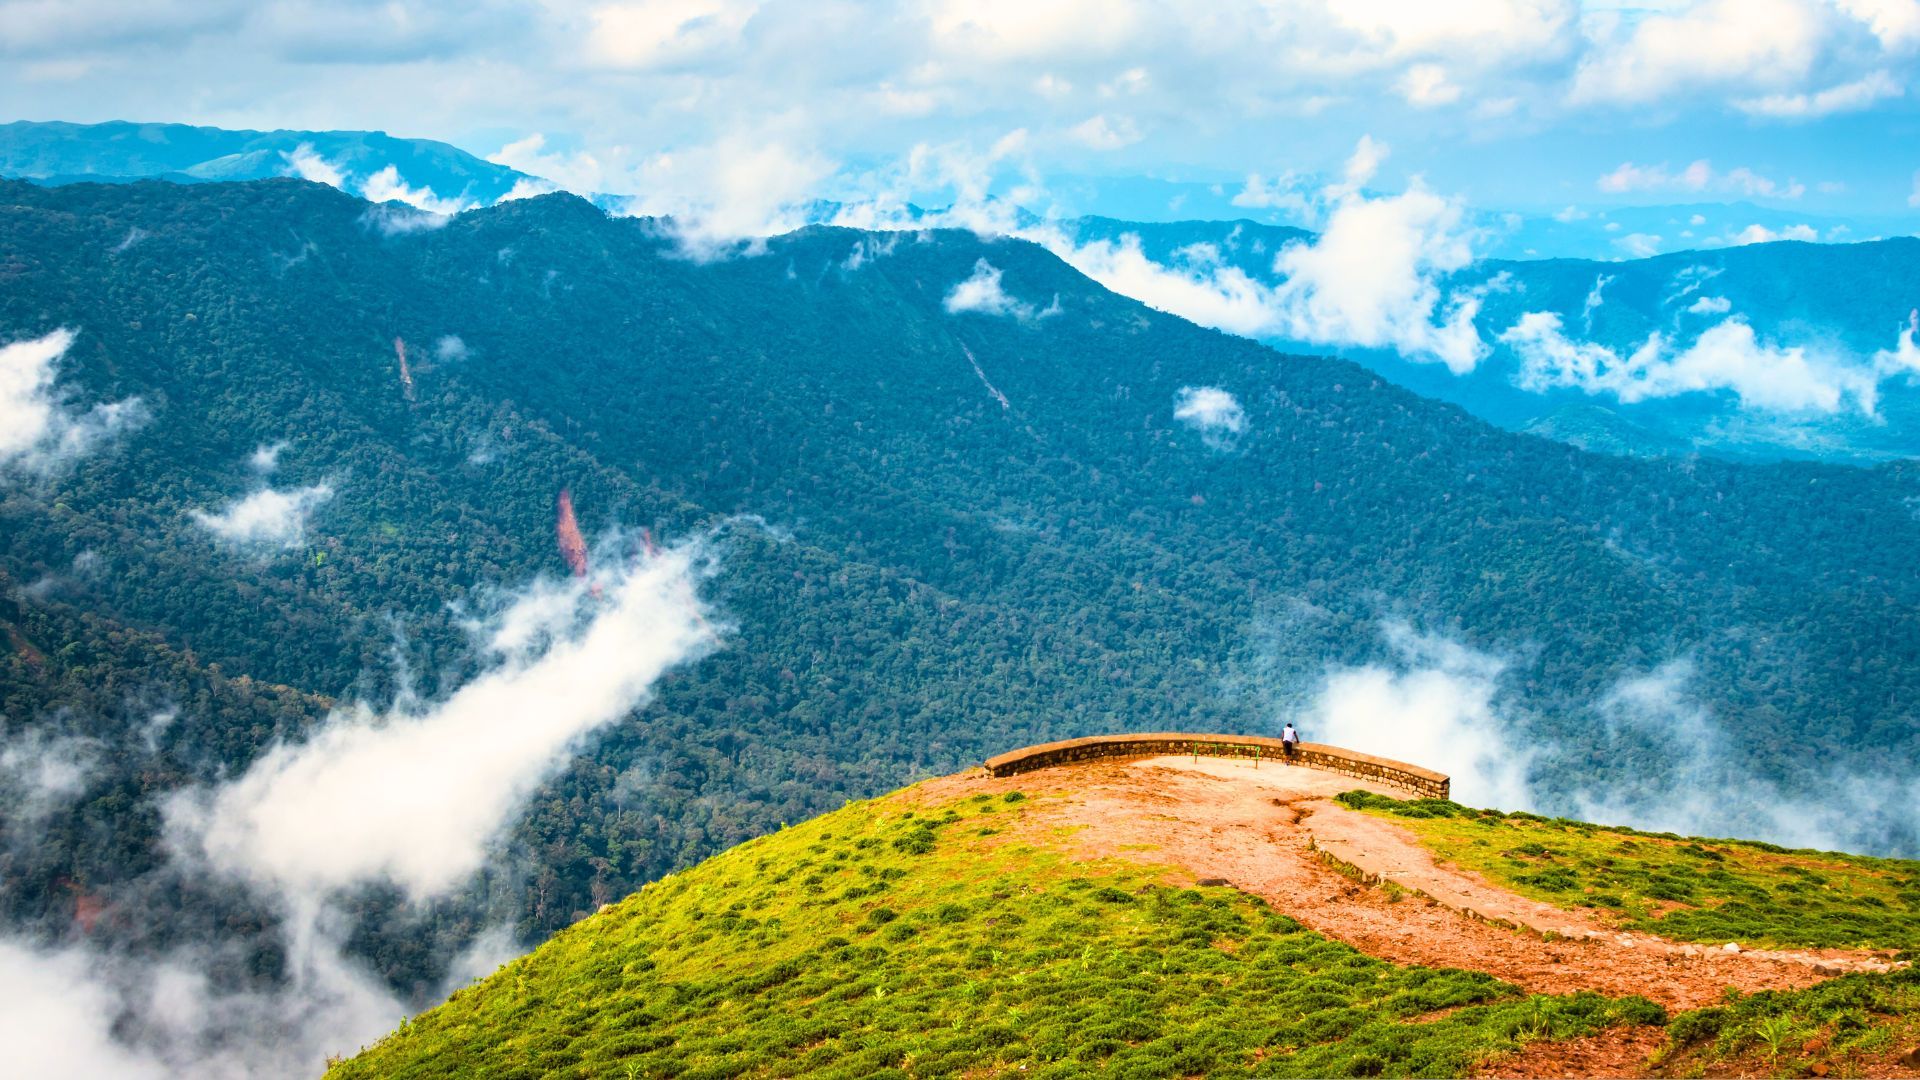 Asia's most beautiful hill stations for your wishlist!